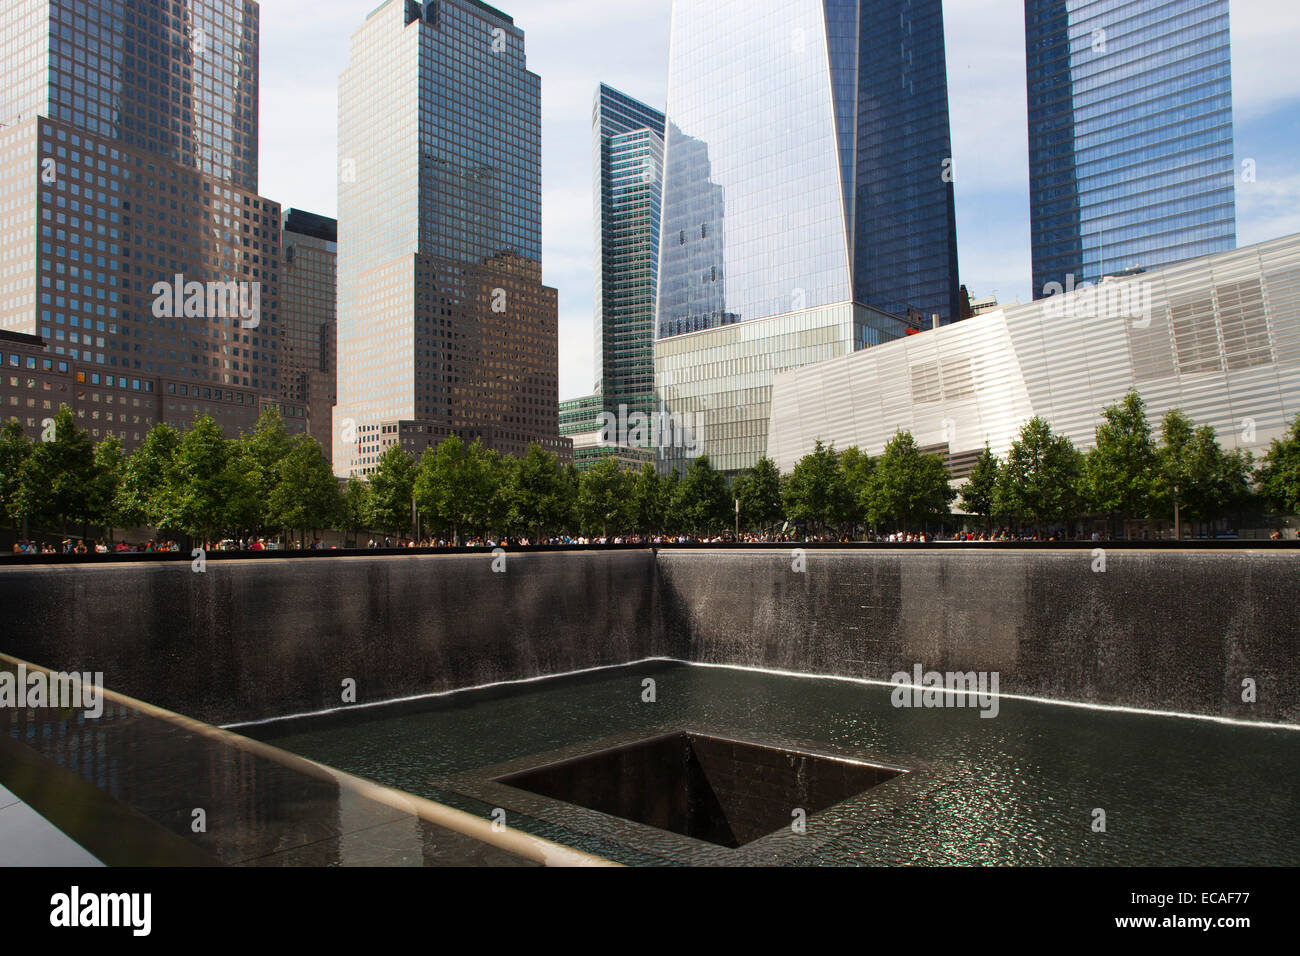 national september 11 memorial and one world trade center and skyscrapers, financial district, Manhattan, New York, Usa, America Stock Photo